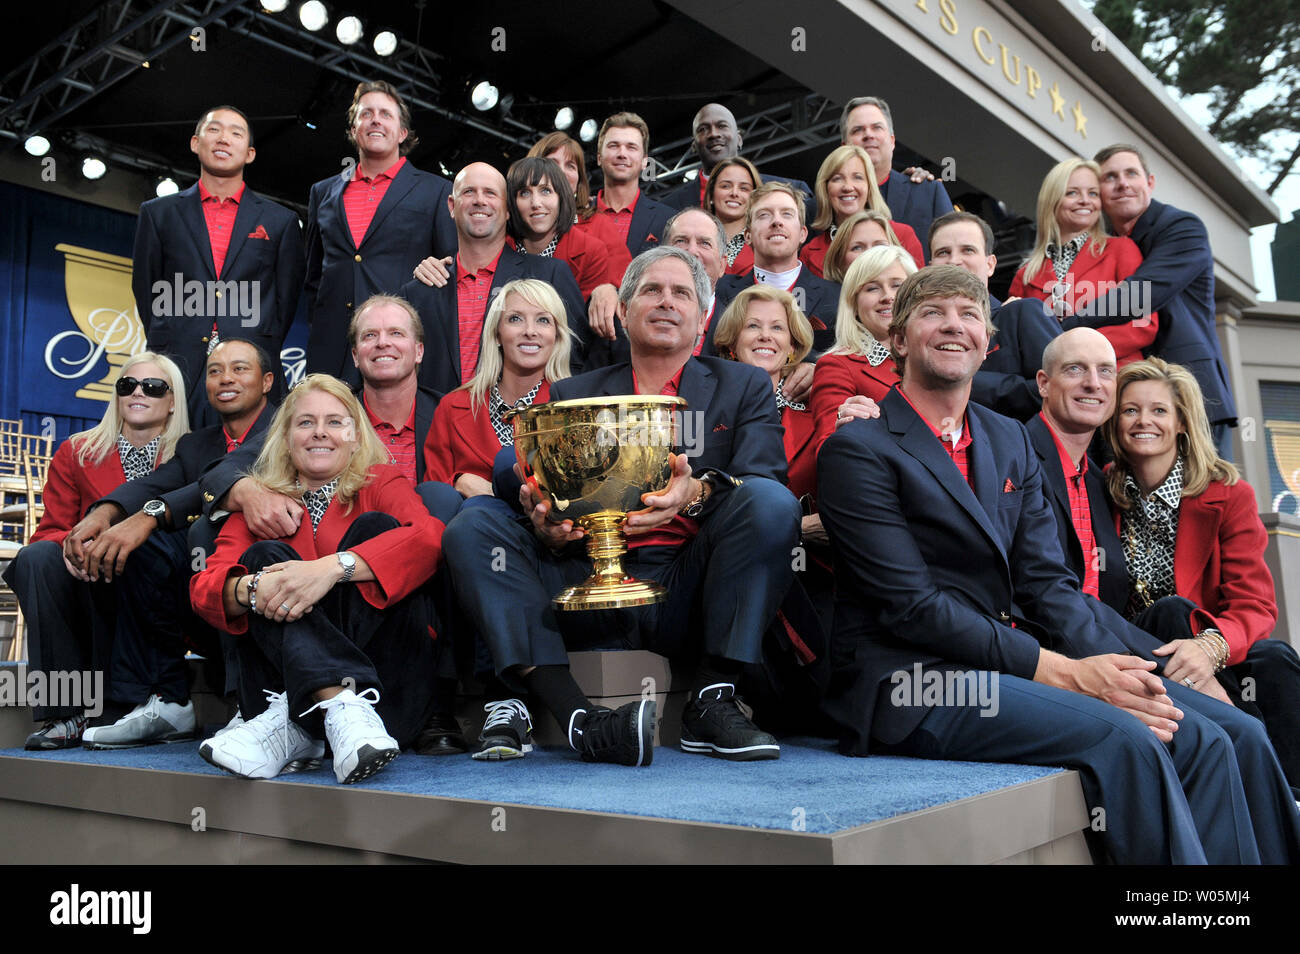 The United States team accompanied by their wives pose for a team photo after winning the Presidents Cup at Harding Park Golf Course in San Francisco, California on October 11, 2009.    UPI/Kevin Dietsch Stock Photo